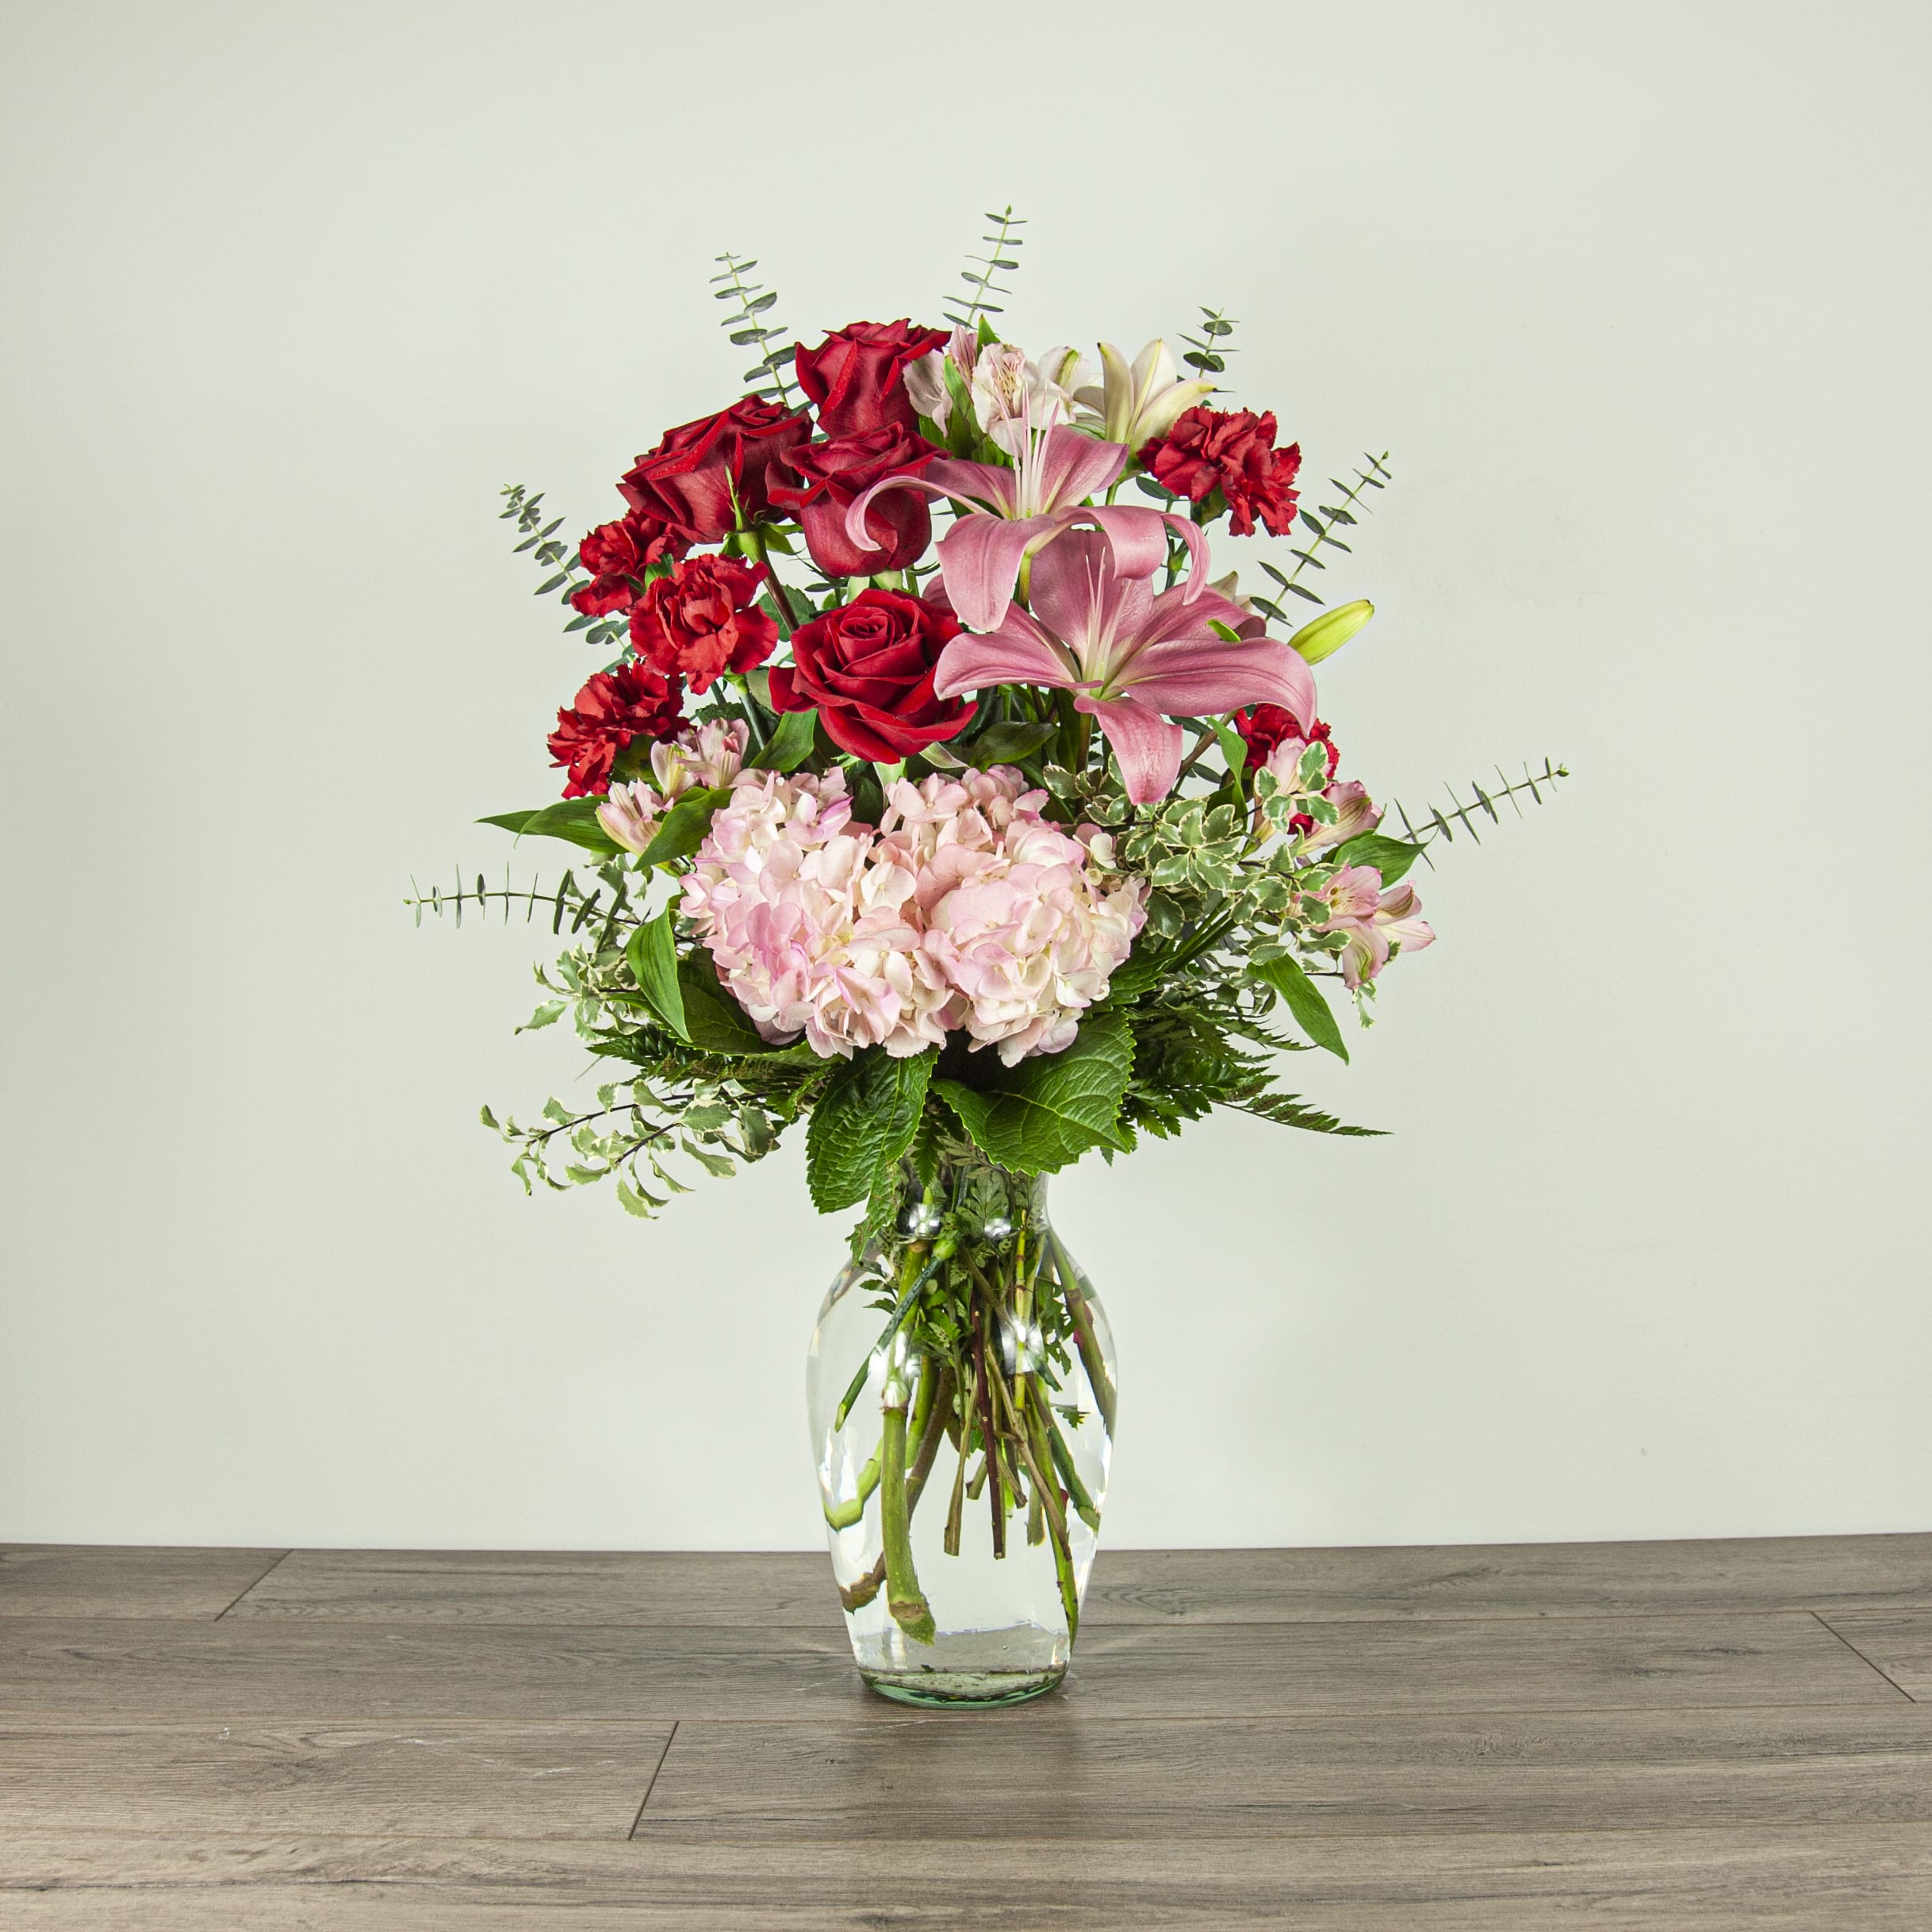 Love Struck (EXP 25) - Show that special someone you care with this beautiful red and pink arrangement, placed inside a nine inch glass vase.   Blooms in this arrangement -  pink hydrangea -  red roses -  hot pink roses -  pink Asiatic lilies -  white with pink accents alstroemerias  -  red carnations  Greenery: - silver pittosporum - baby blue eucalyptus - lemon leaves